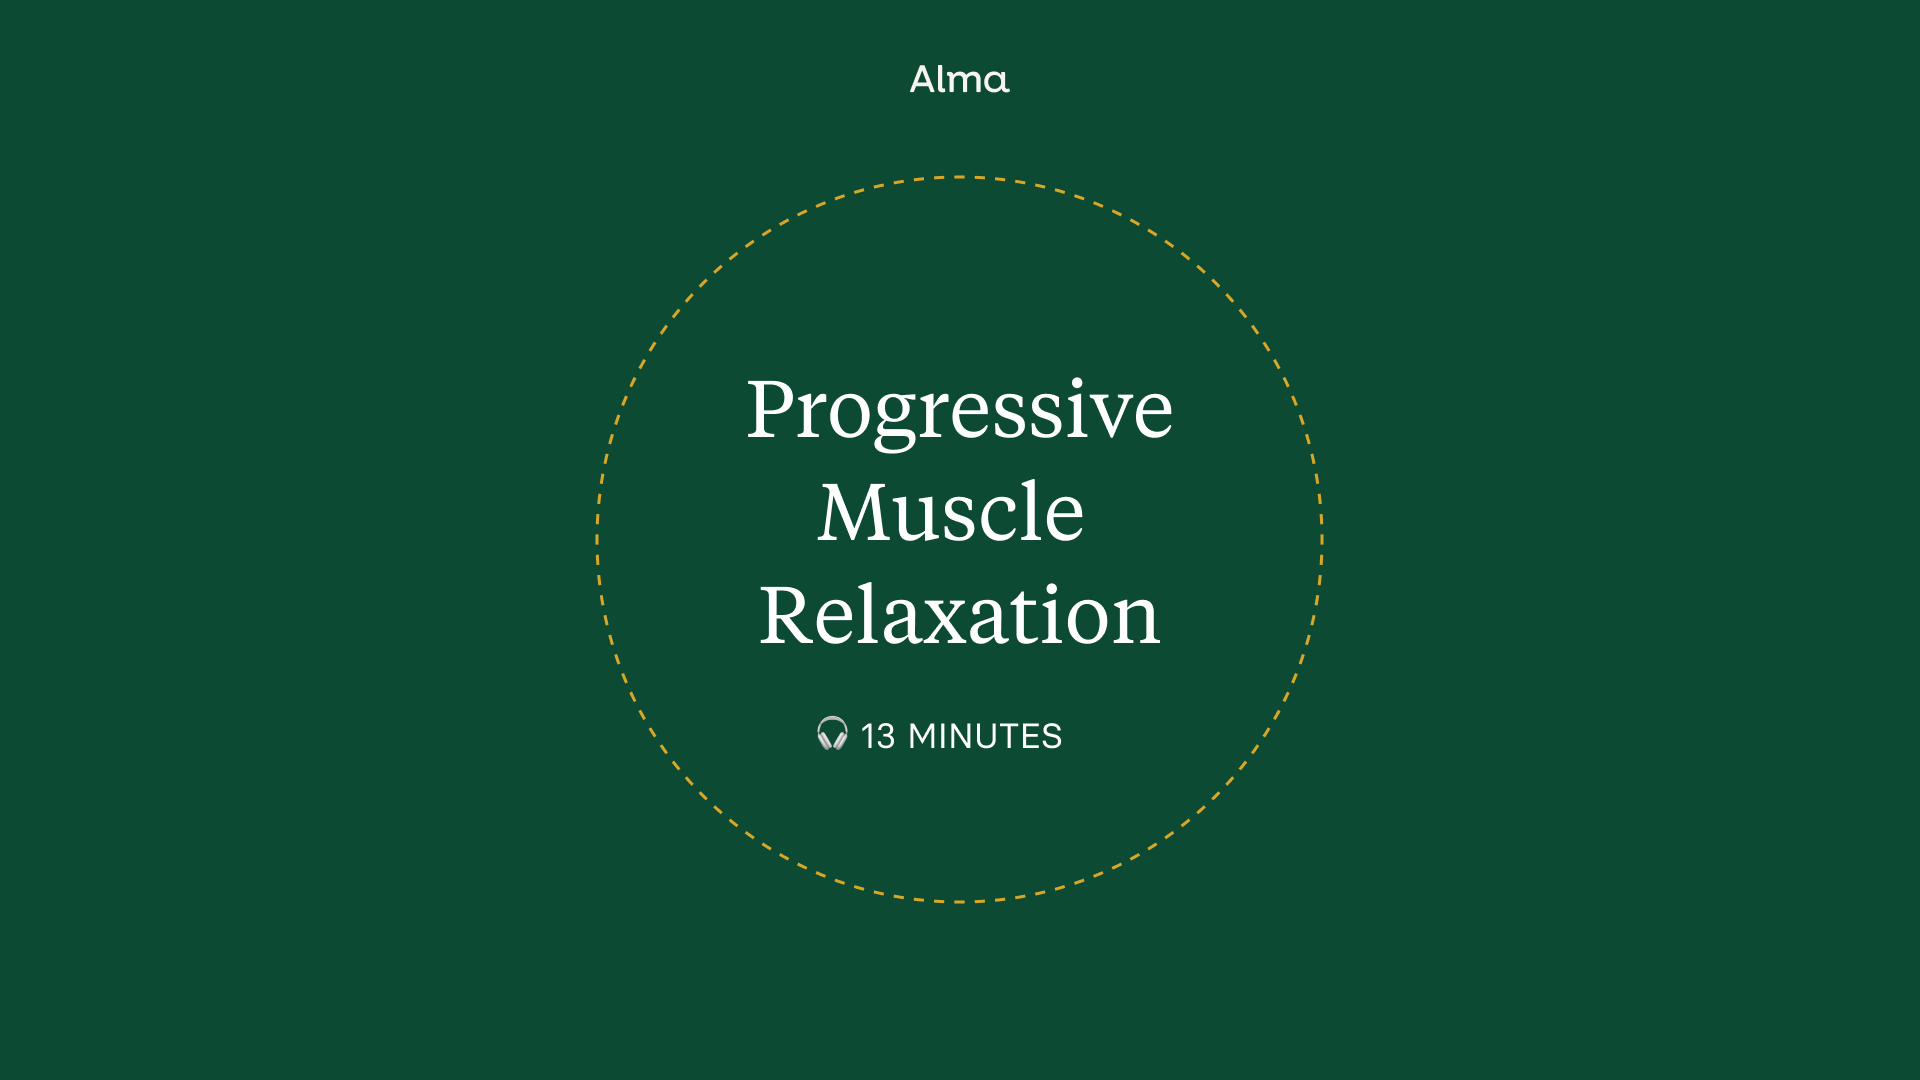 Progressive Muscle Relaxation (13 minutes)